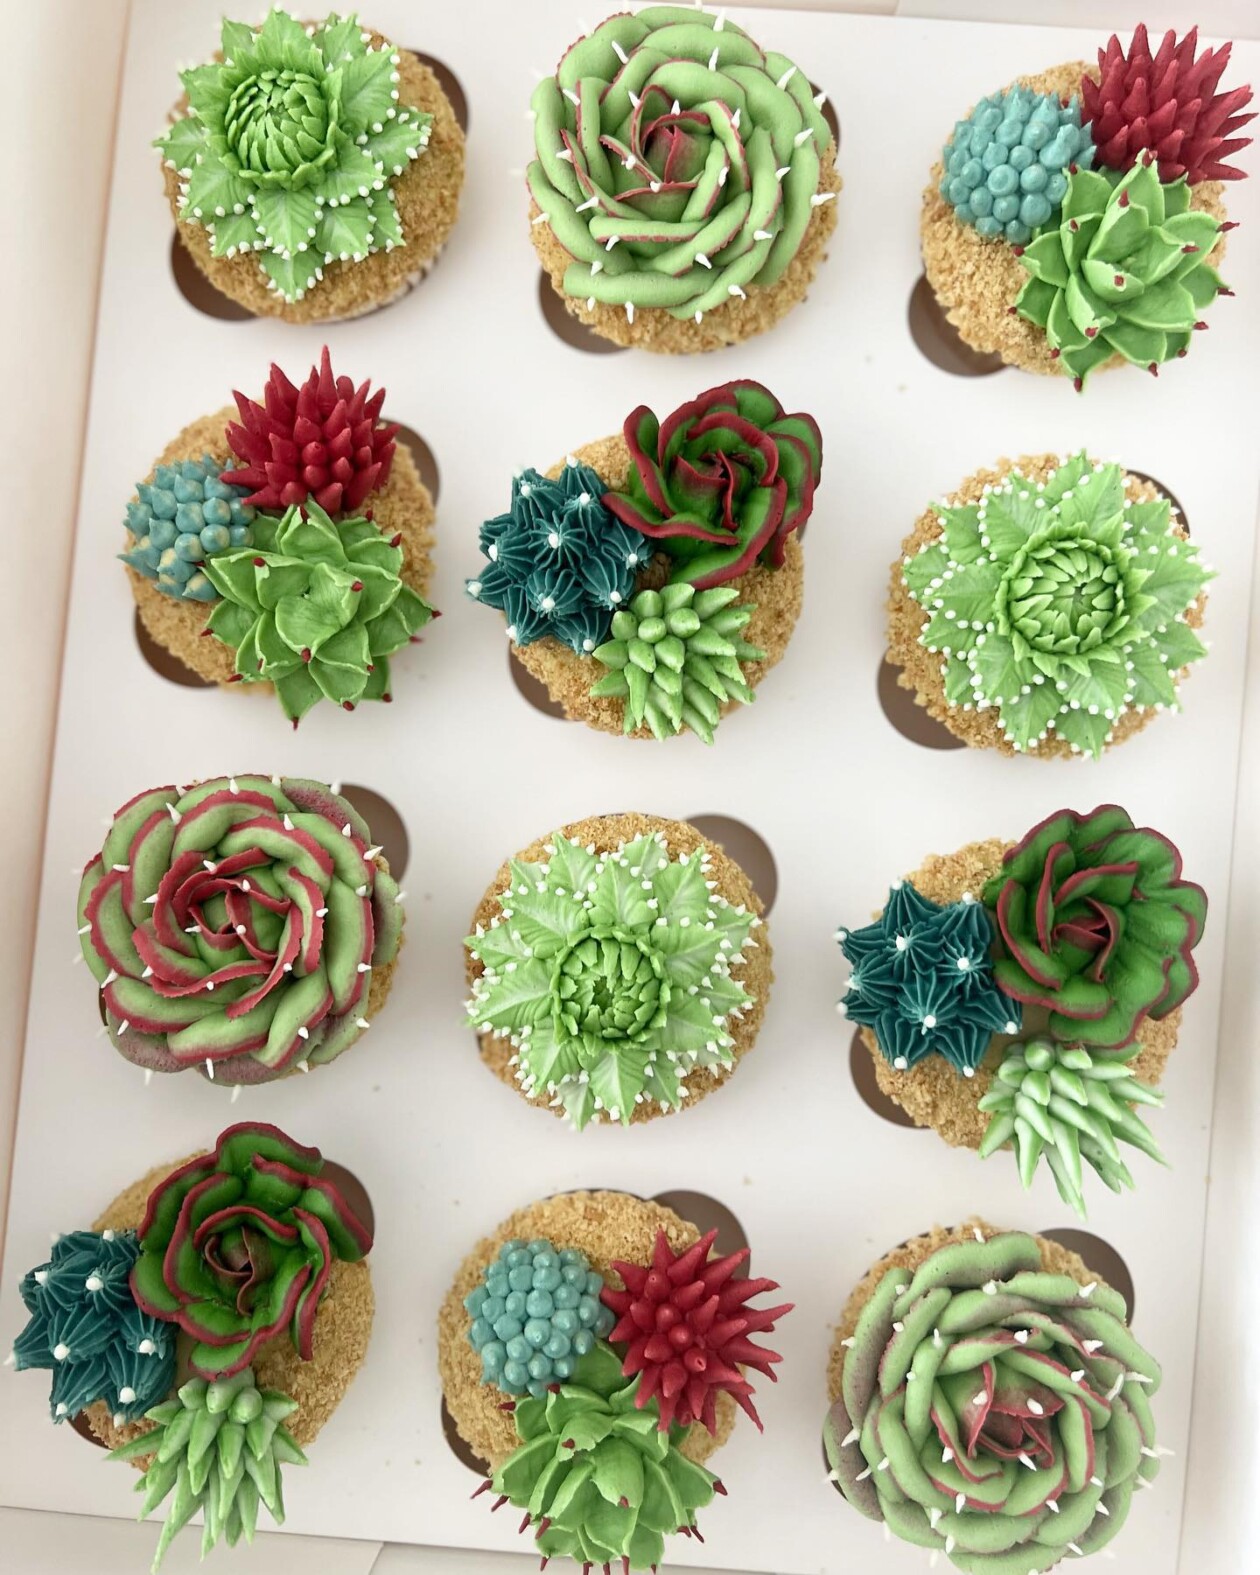 Gorgeous Cupcakes Decorated With Buttercream Flowers And Succulents By Kerry's Bouqcakes (14)